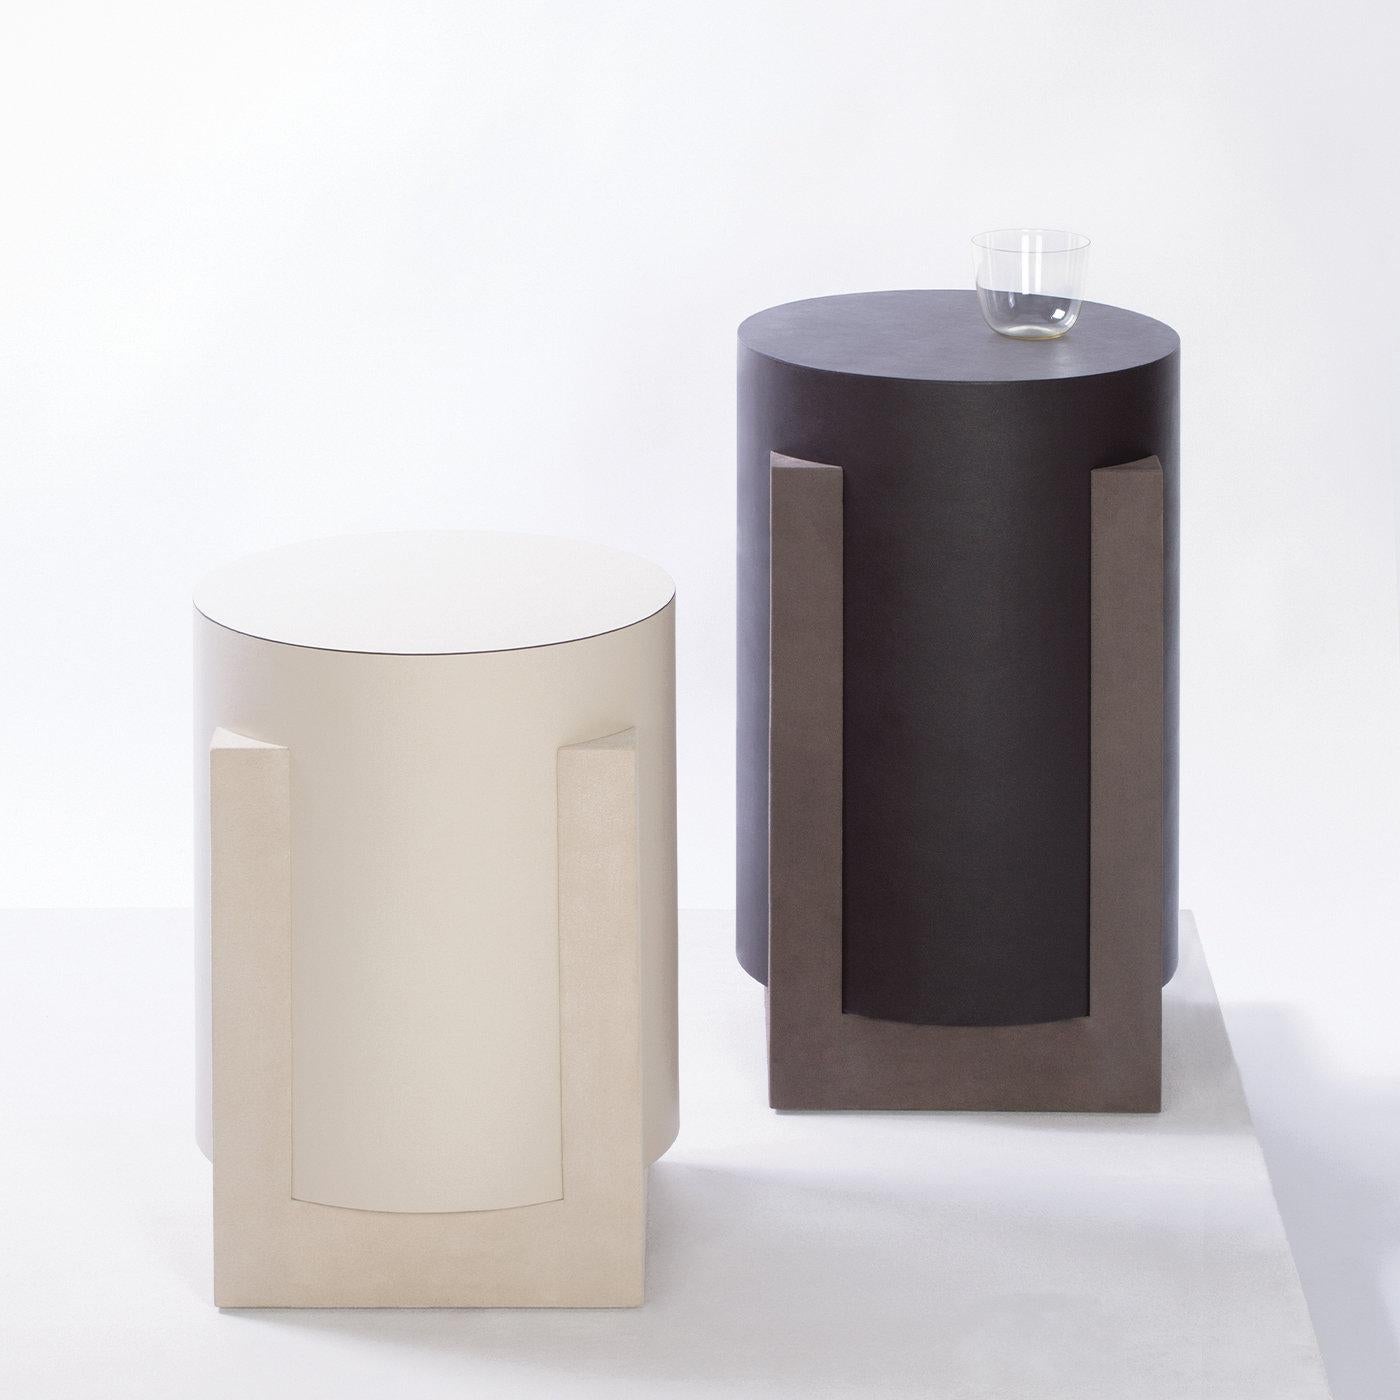 Contemporary leather side table - Palazzo by Stephane Parmentier for Giobagnara.
The object presented in the image has following finish: F09 Brown Nappa Leather and A24 Smoke Suede Leather (base).

The Palazzo Collection pays homage to the